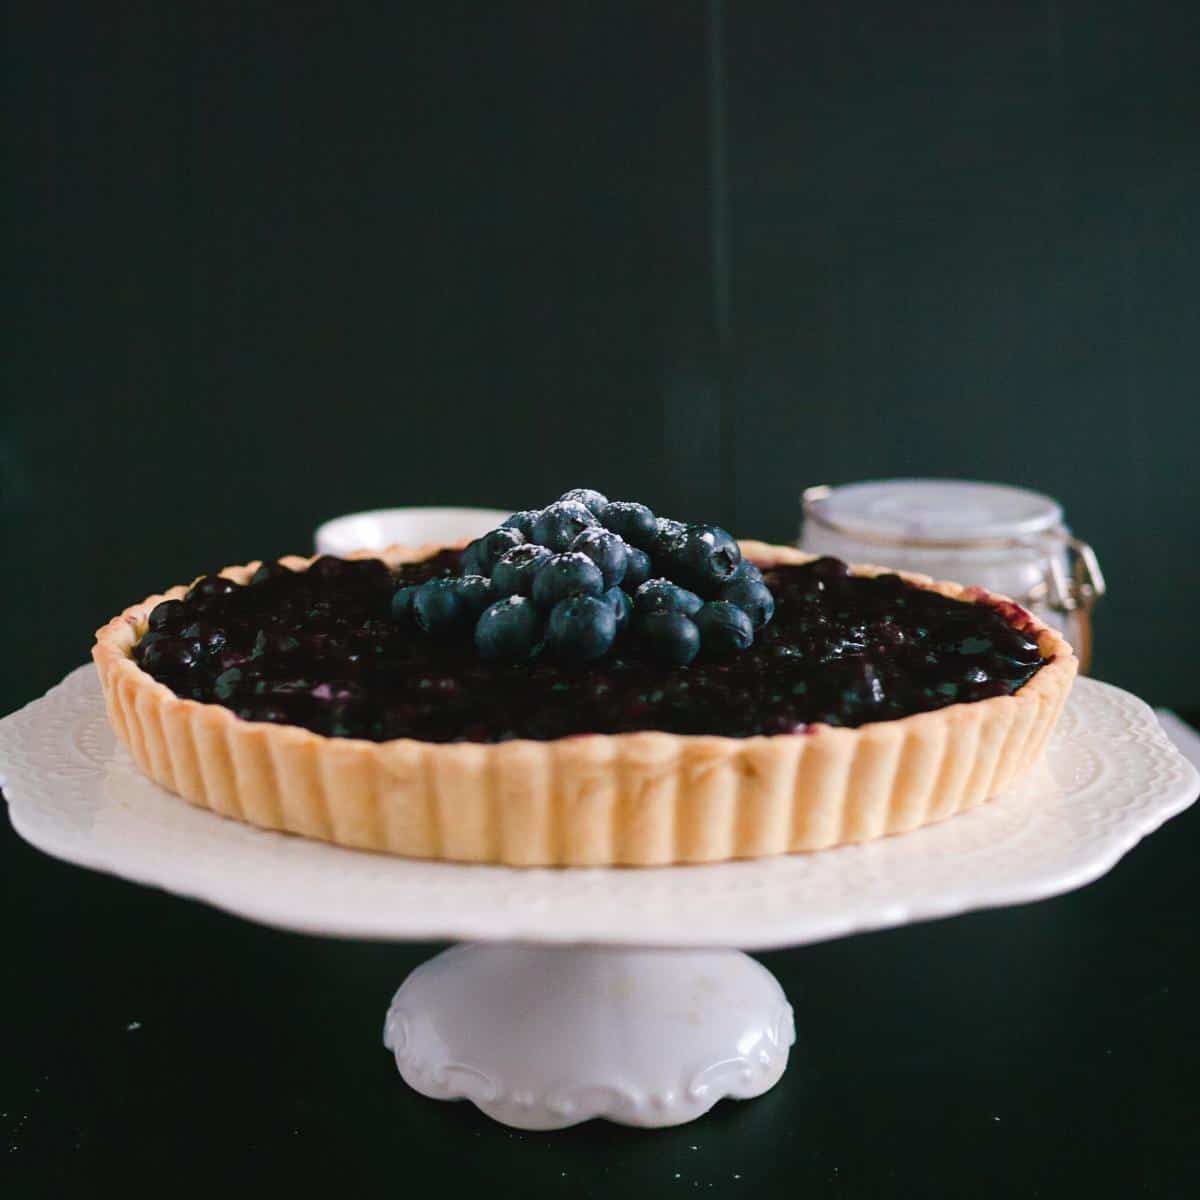 A blueberry tart on a cake stand.